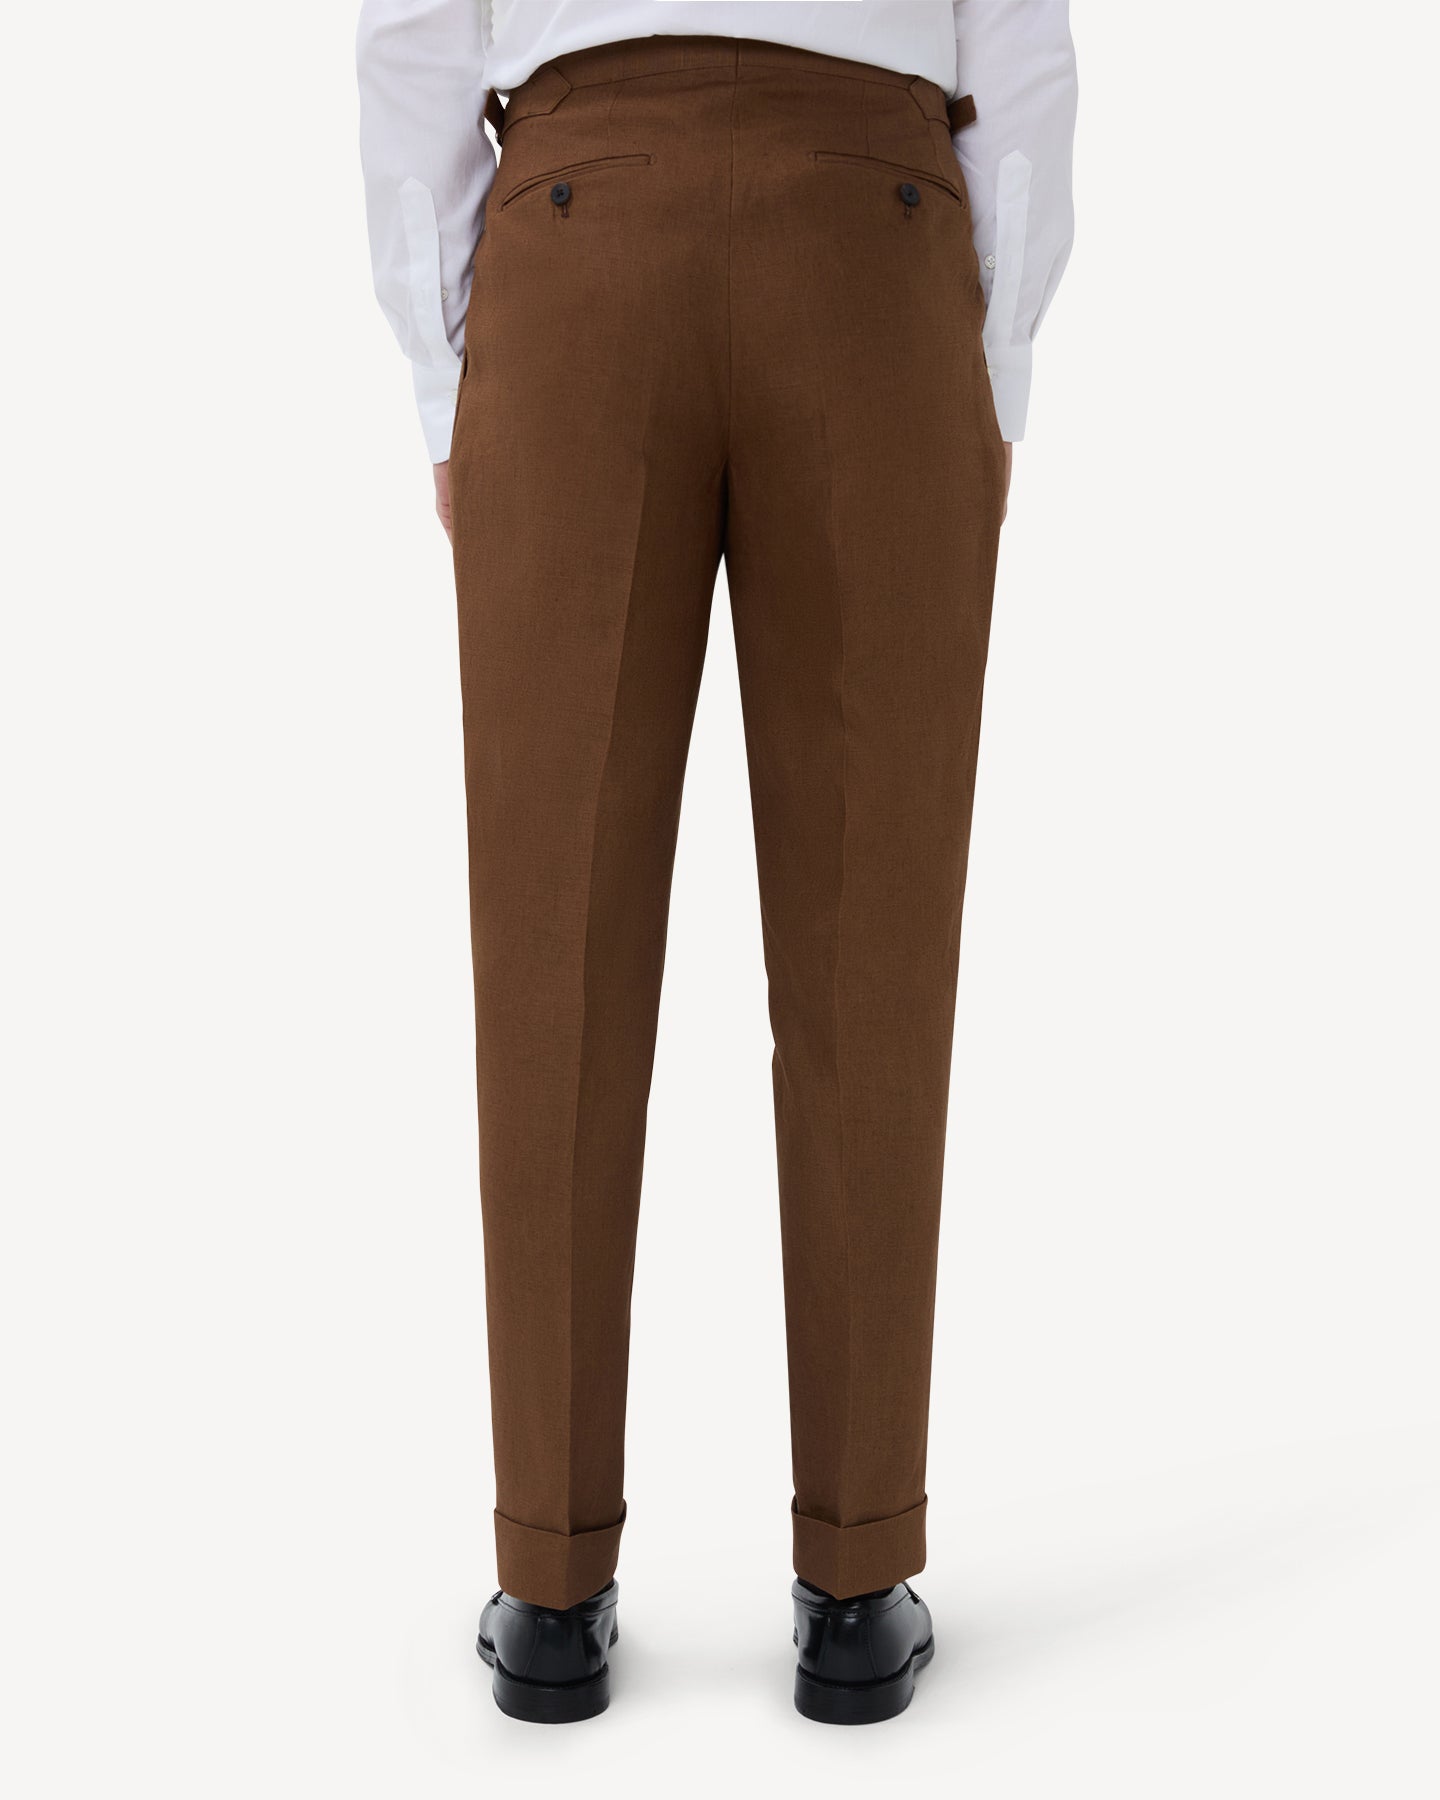 The back of dark tan linen trousers with single pleats and side adjusters